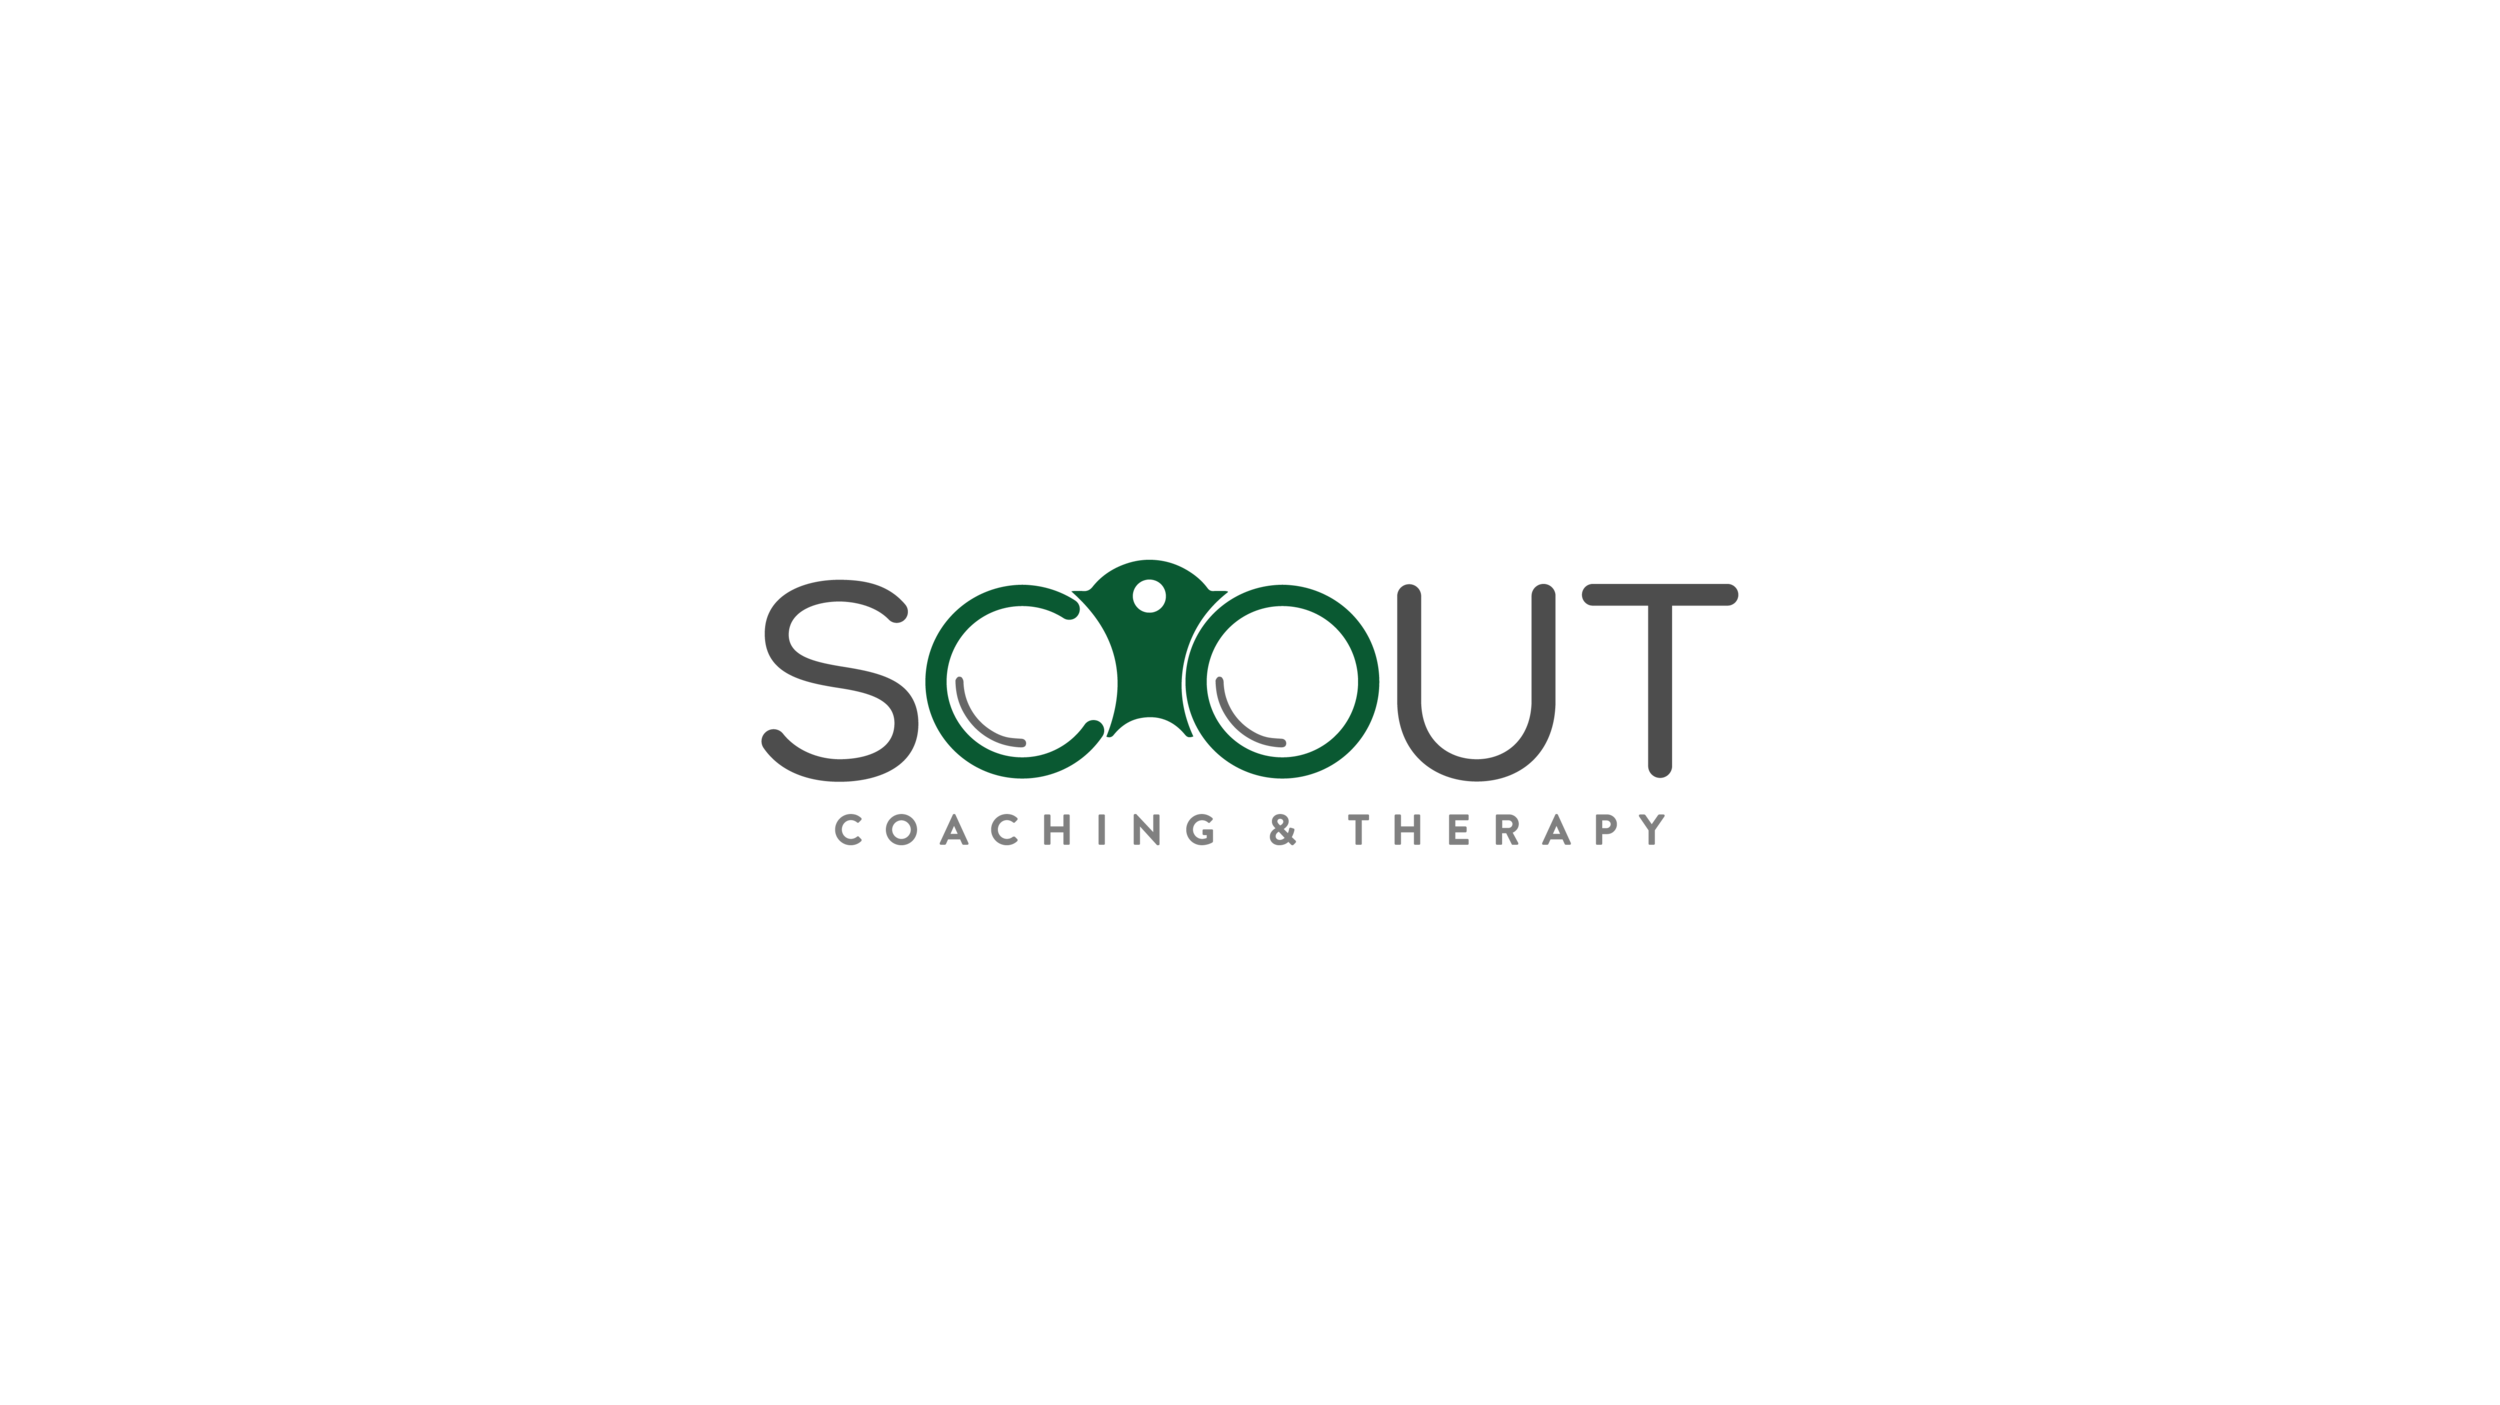 Scout Coaching &amp; Therapy